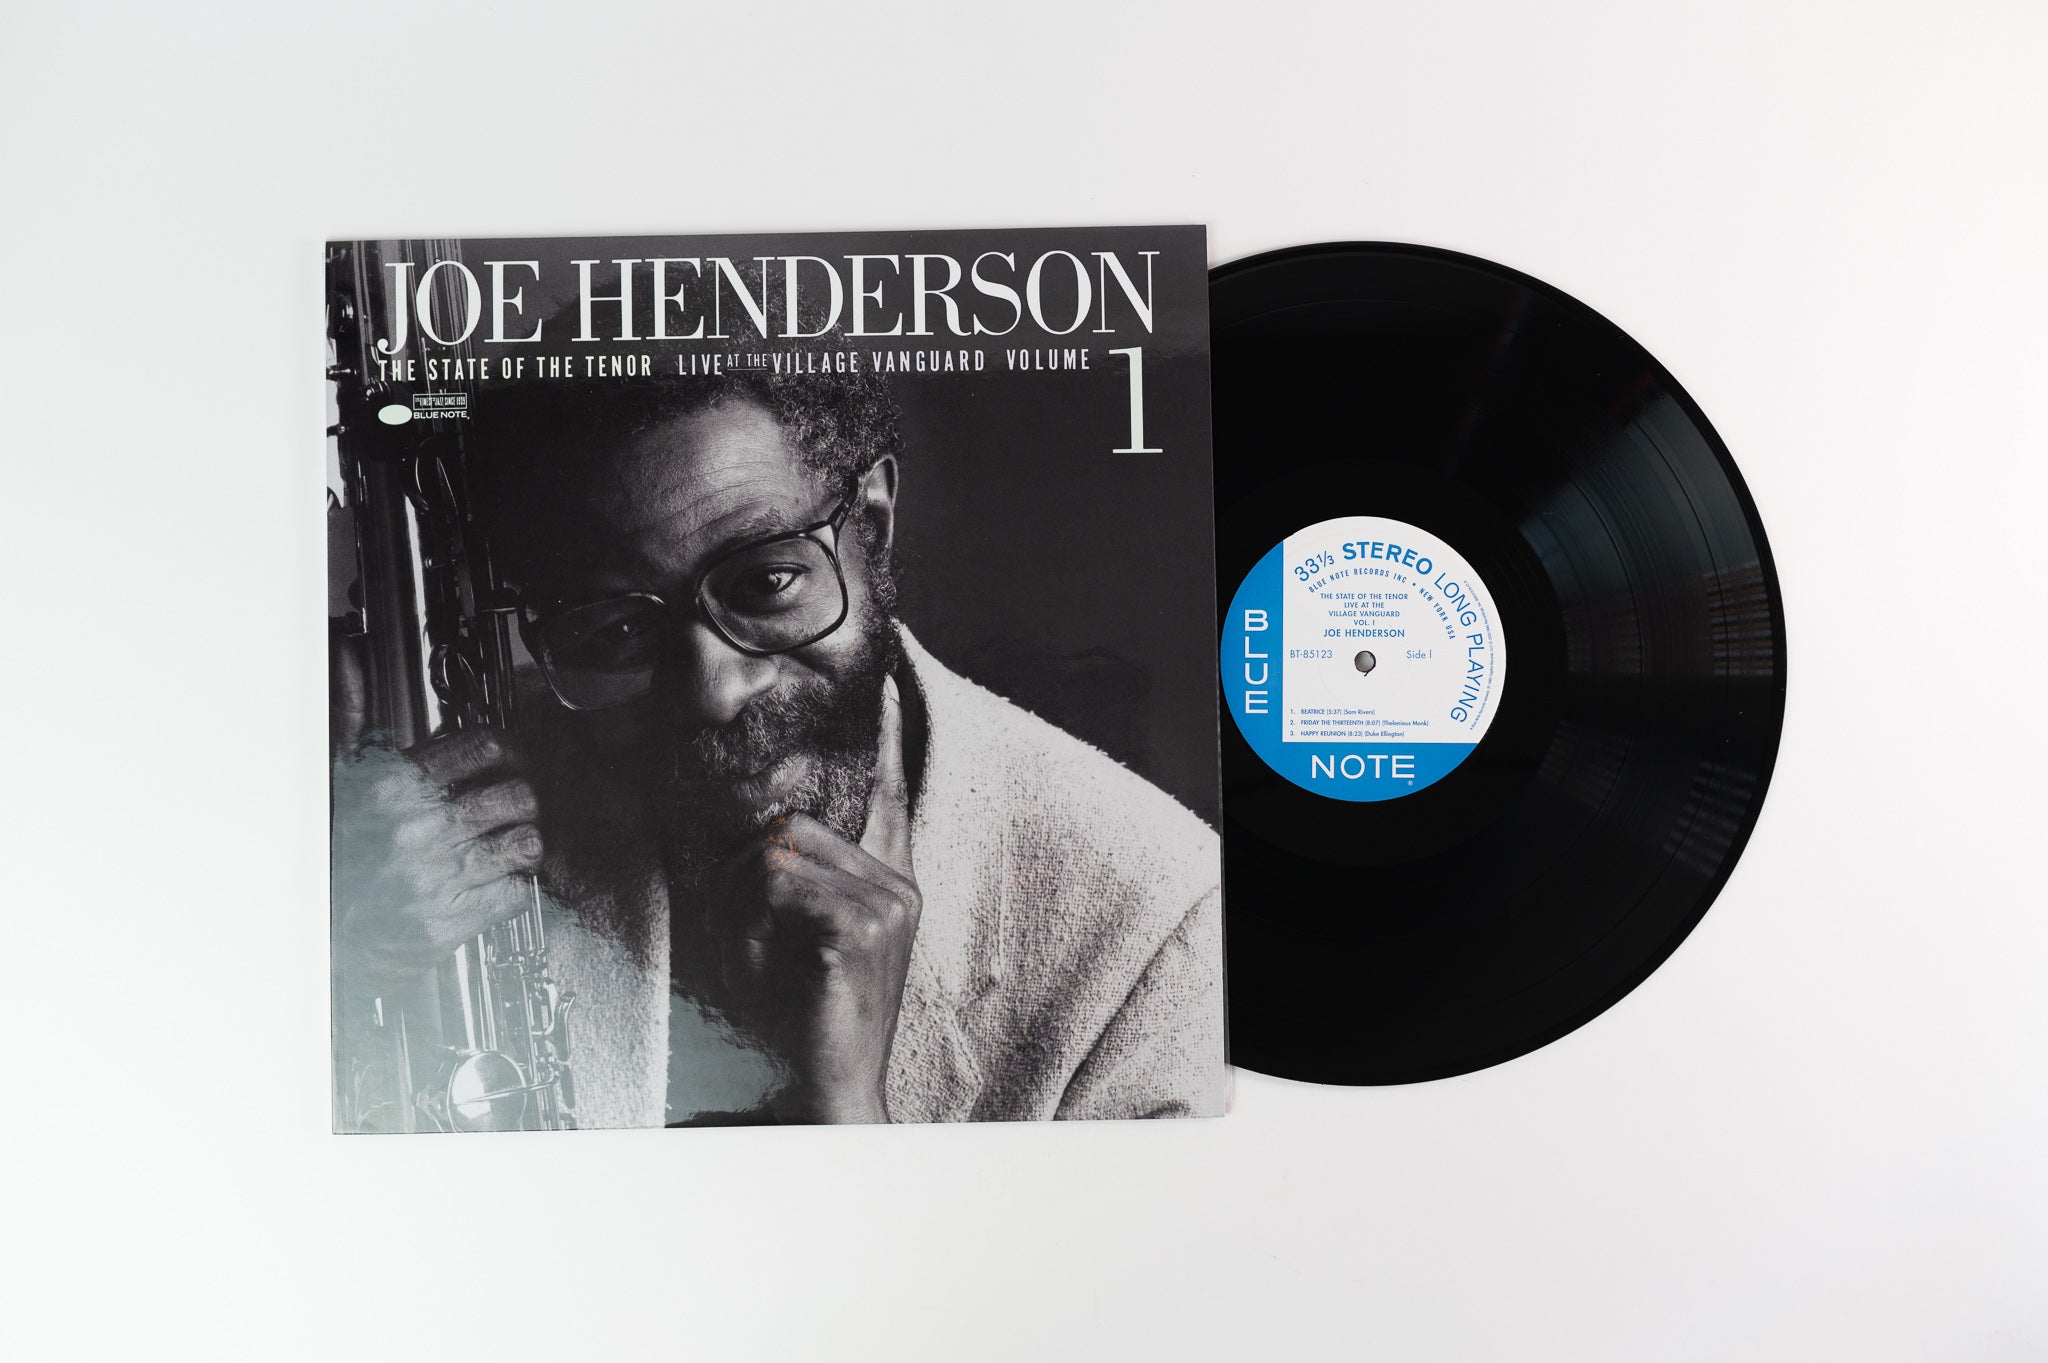 Joe Henderson - The State Of The Tenor (Live At The Village Vanguard Volume 1) on Blue Note Tone Poet Series Reissue